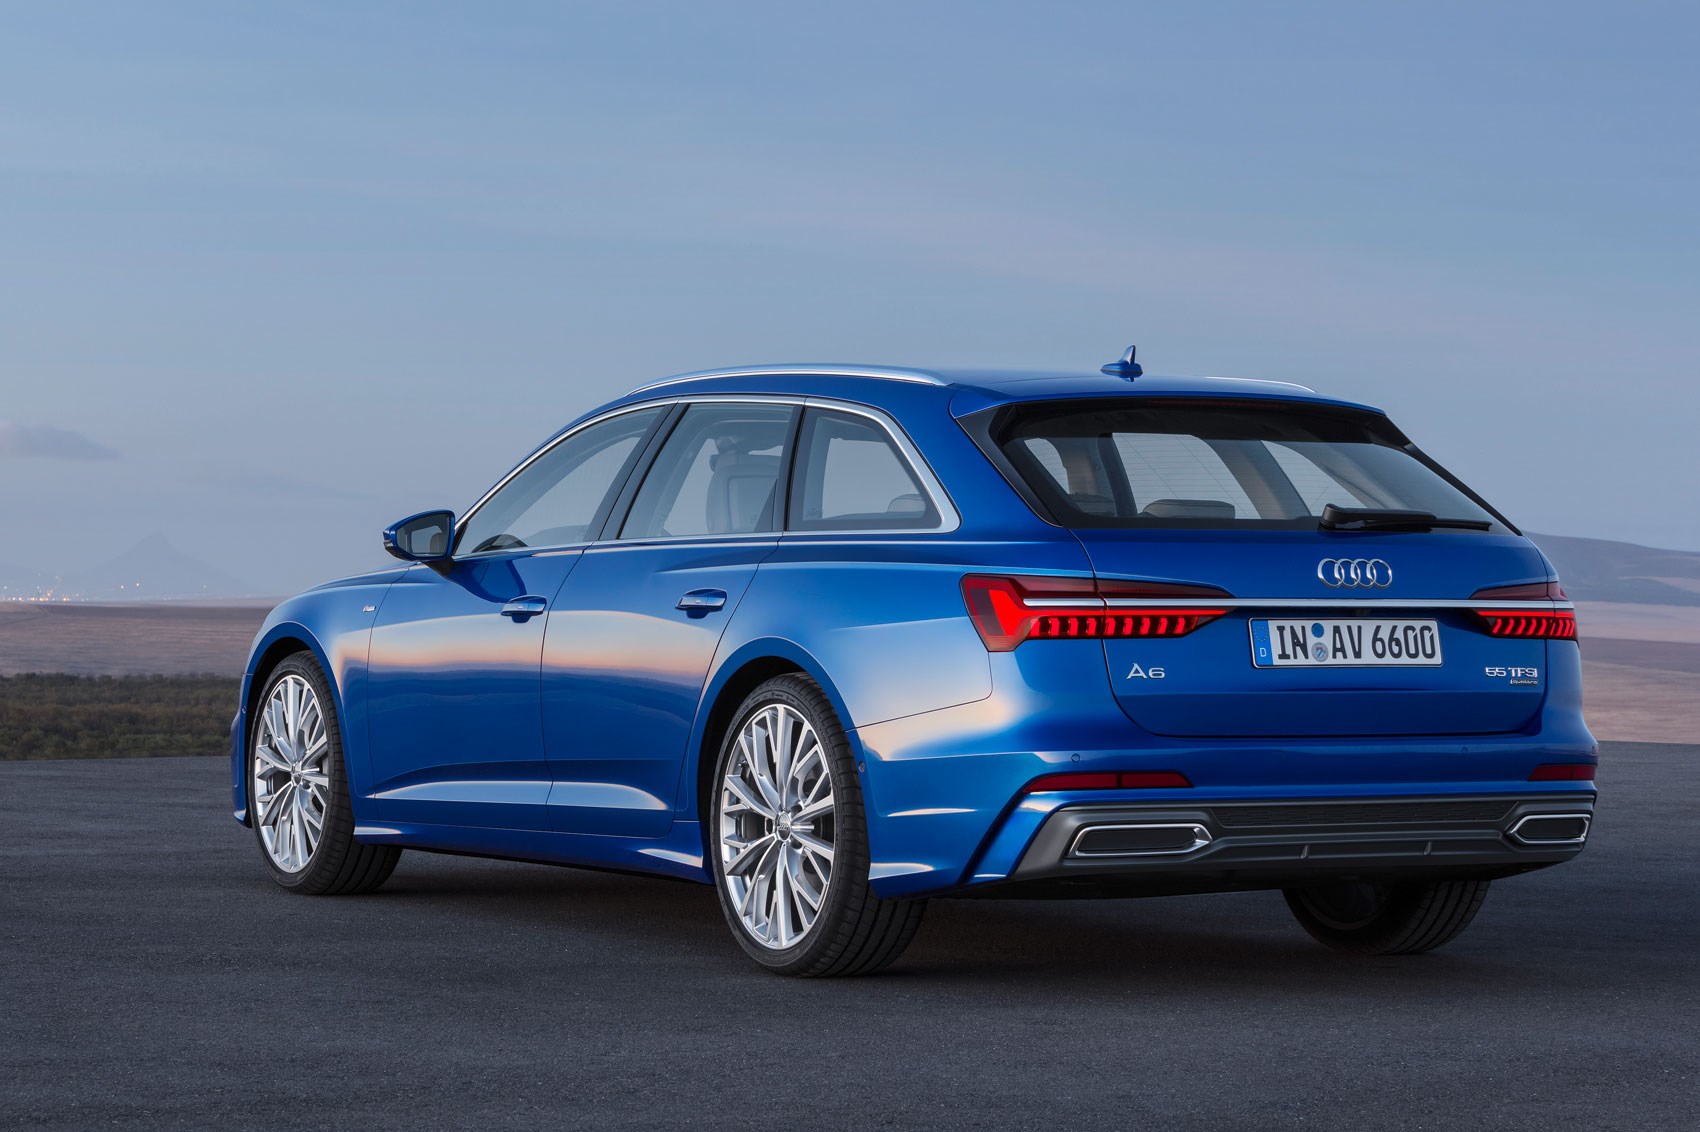 Gaining an Avant-age: new Audi A6 Avant estate is here